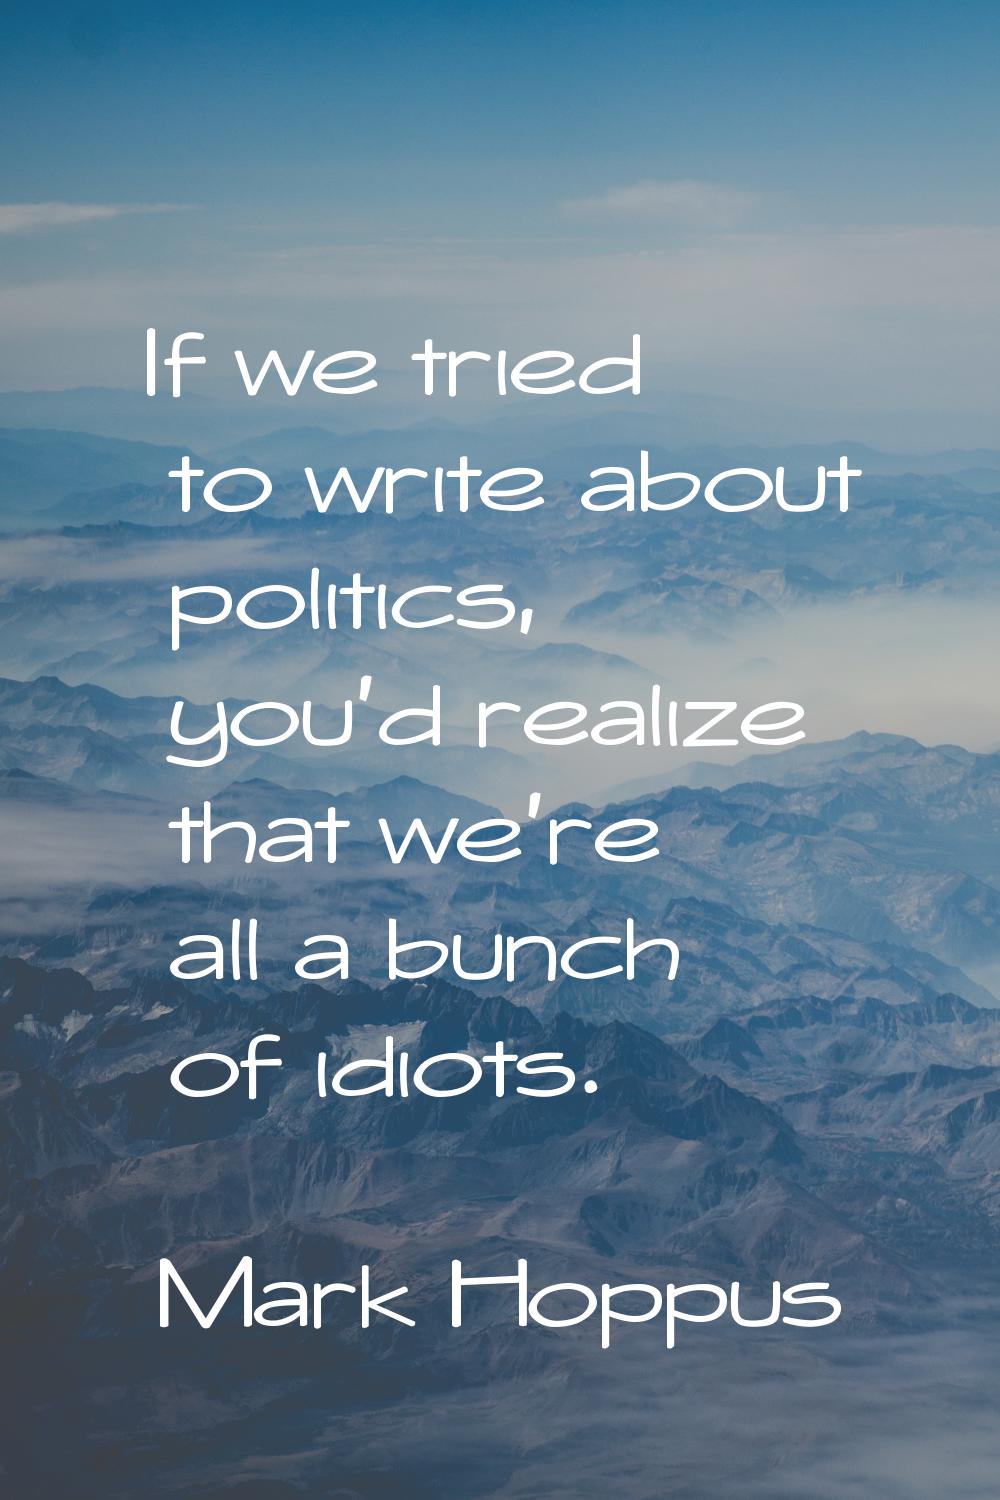 If we tried to write about politics, you'd realize that we're all a bunch of idiots.